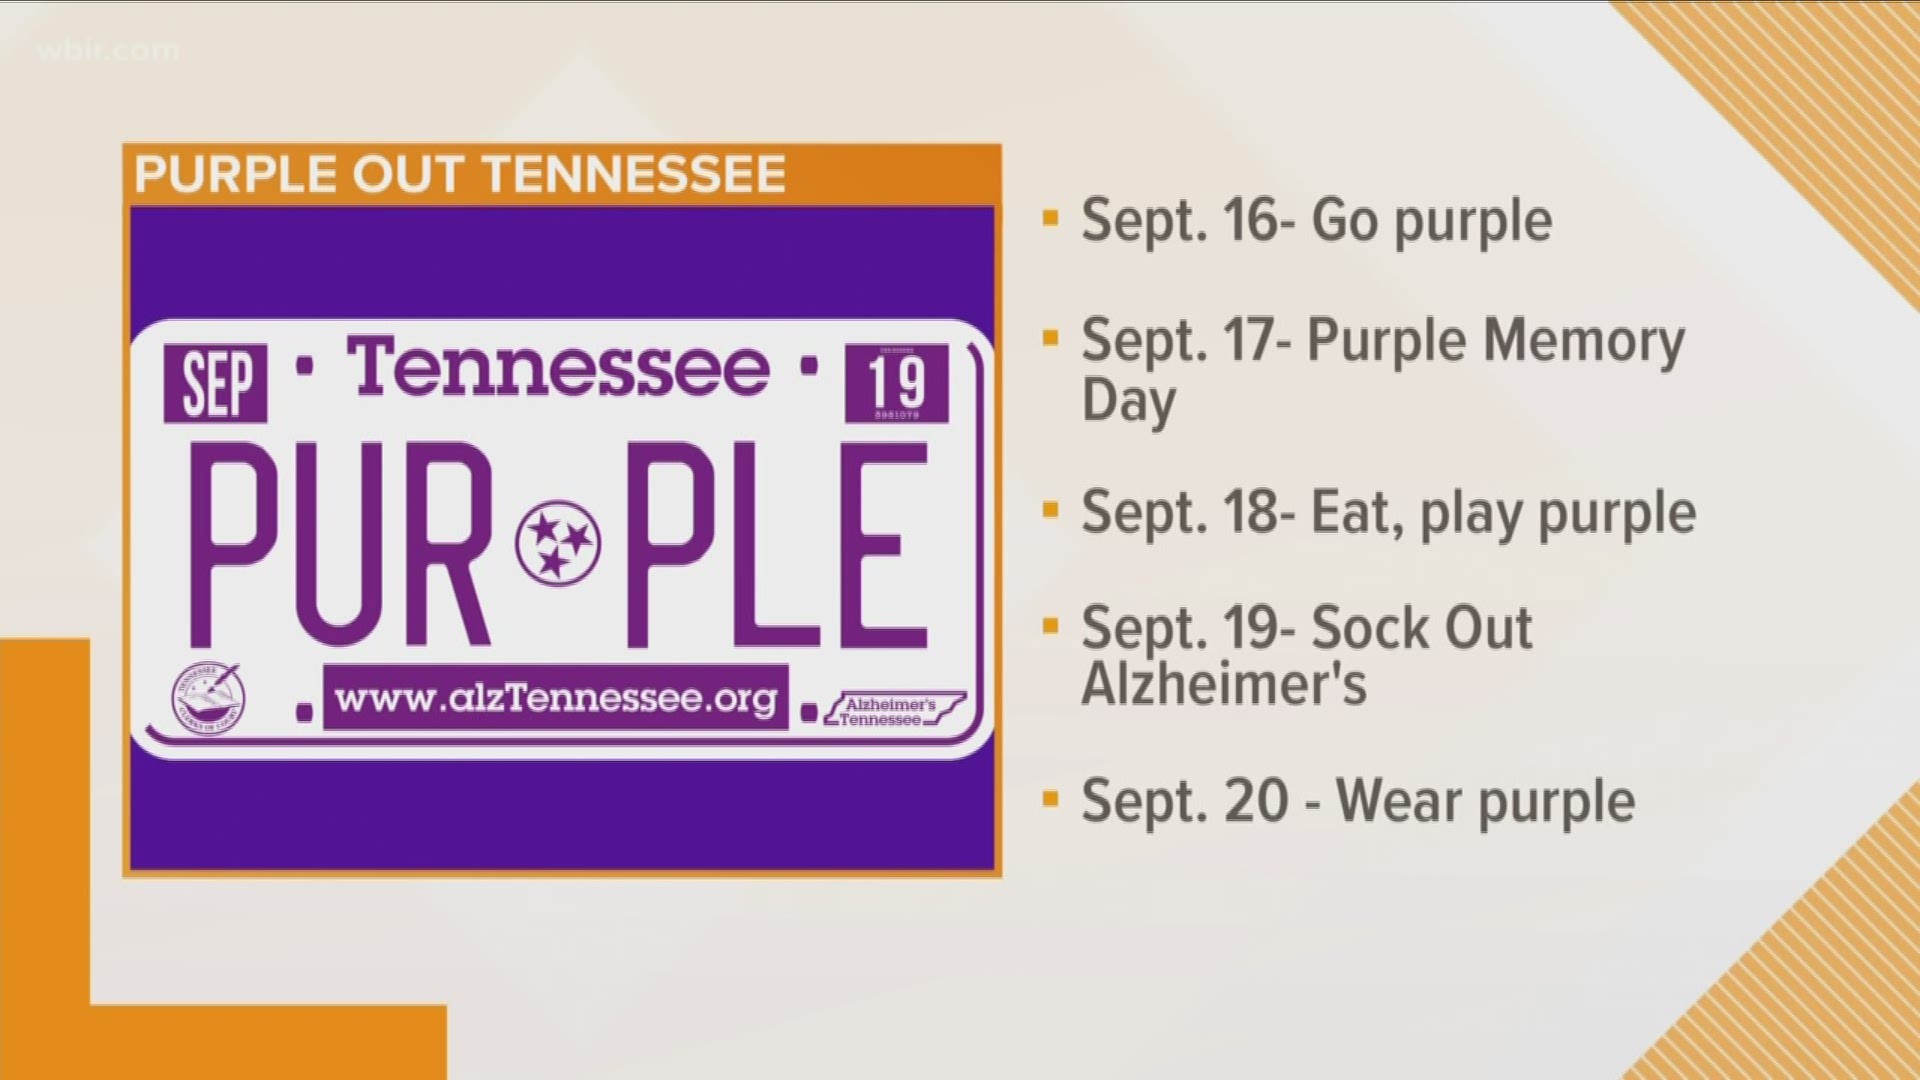 Next week, Tennesseans across the state will not only wear purple but also decorate offices, classrooms and home to raise awareness and money to support Alzheimer's Tennessee.